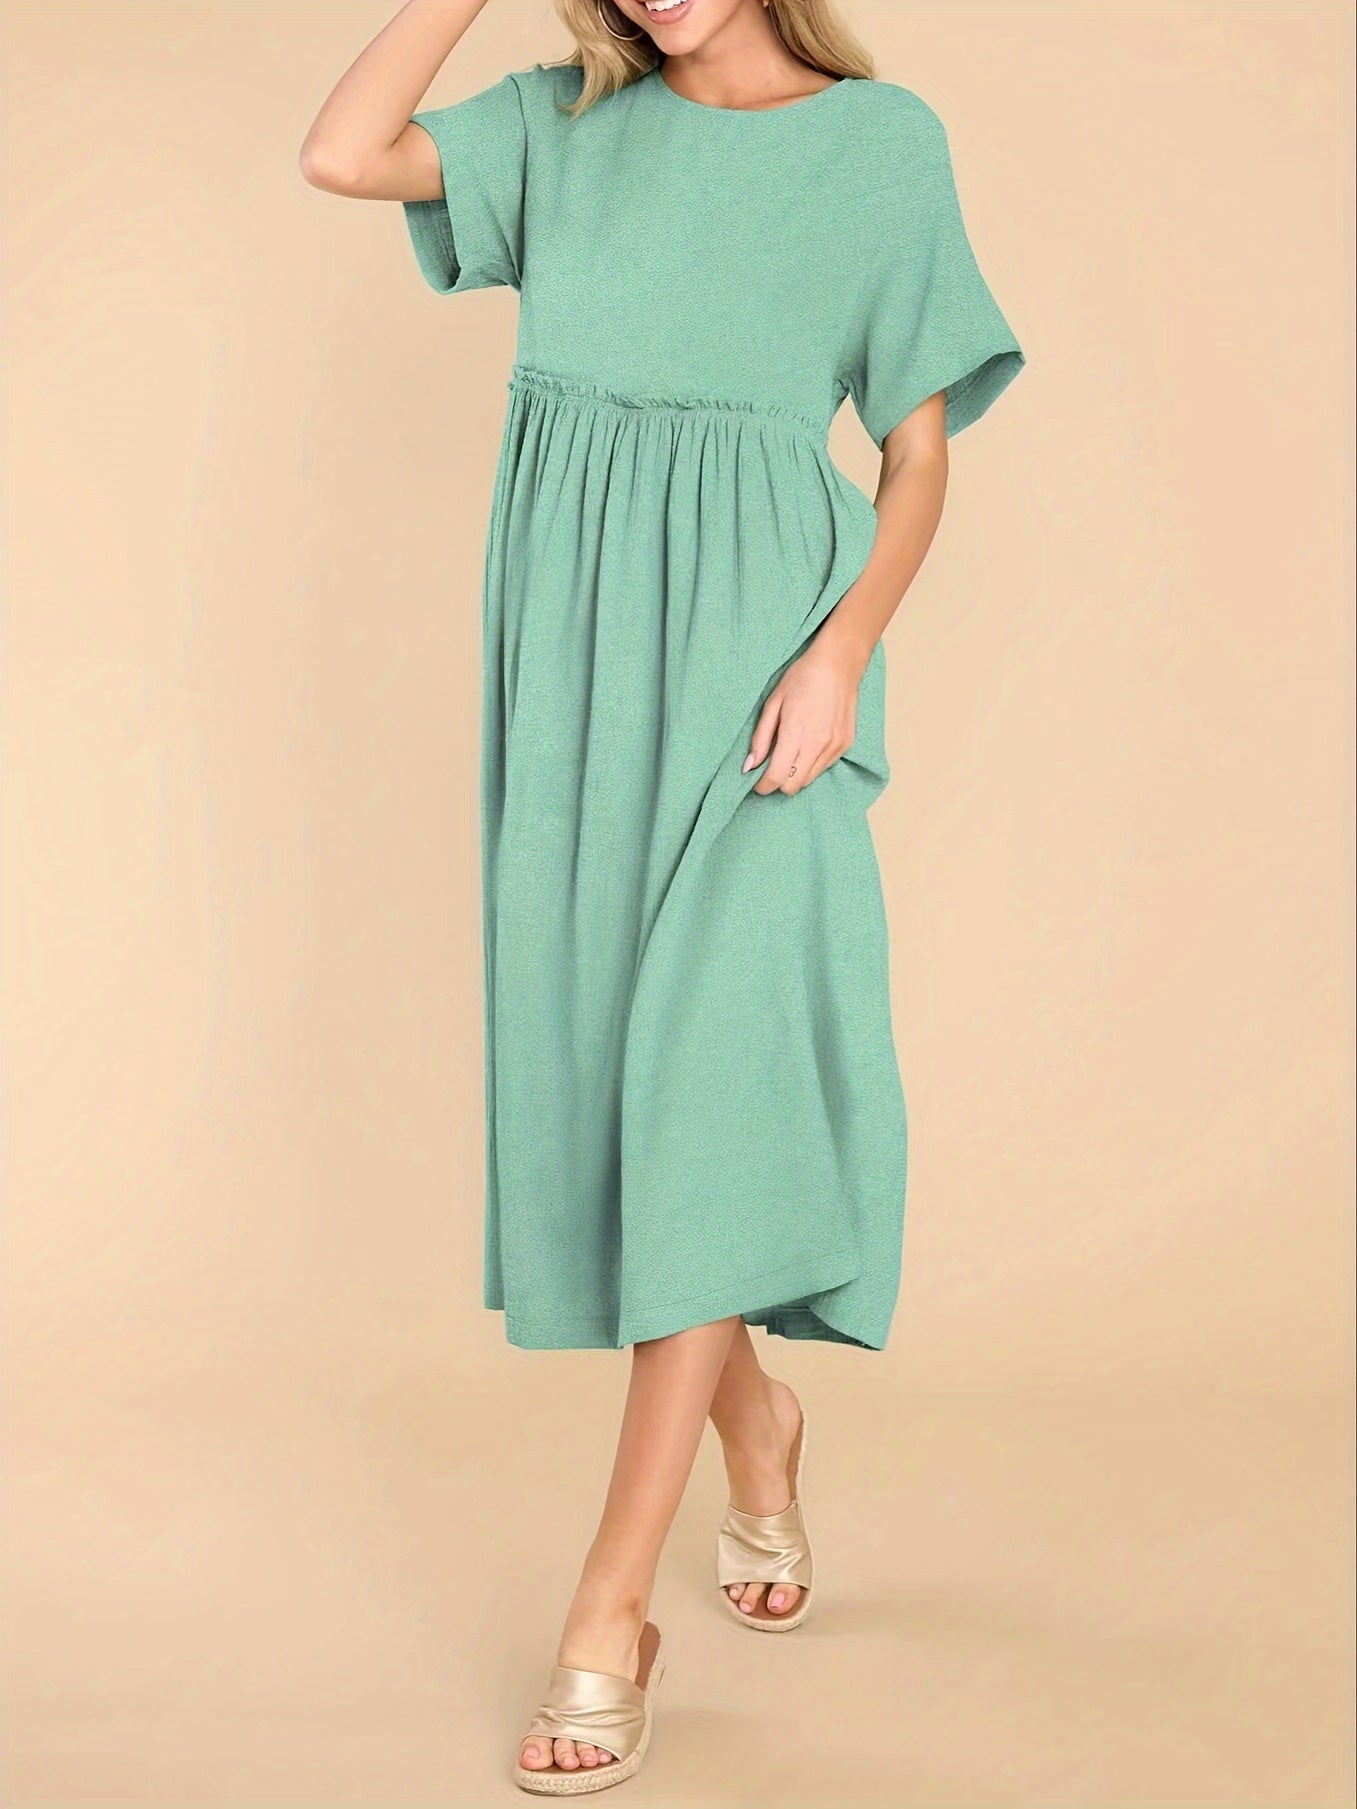 Bohemian Solid Color Short Sleeve Midi Dress With Pocket, Elegant Ruffle Dress With Pocket For Spring and Summer, Women's Dress